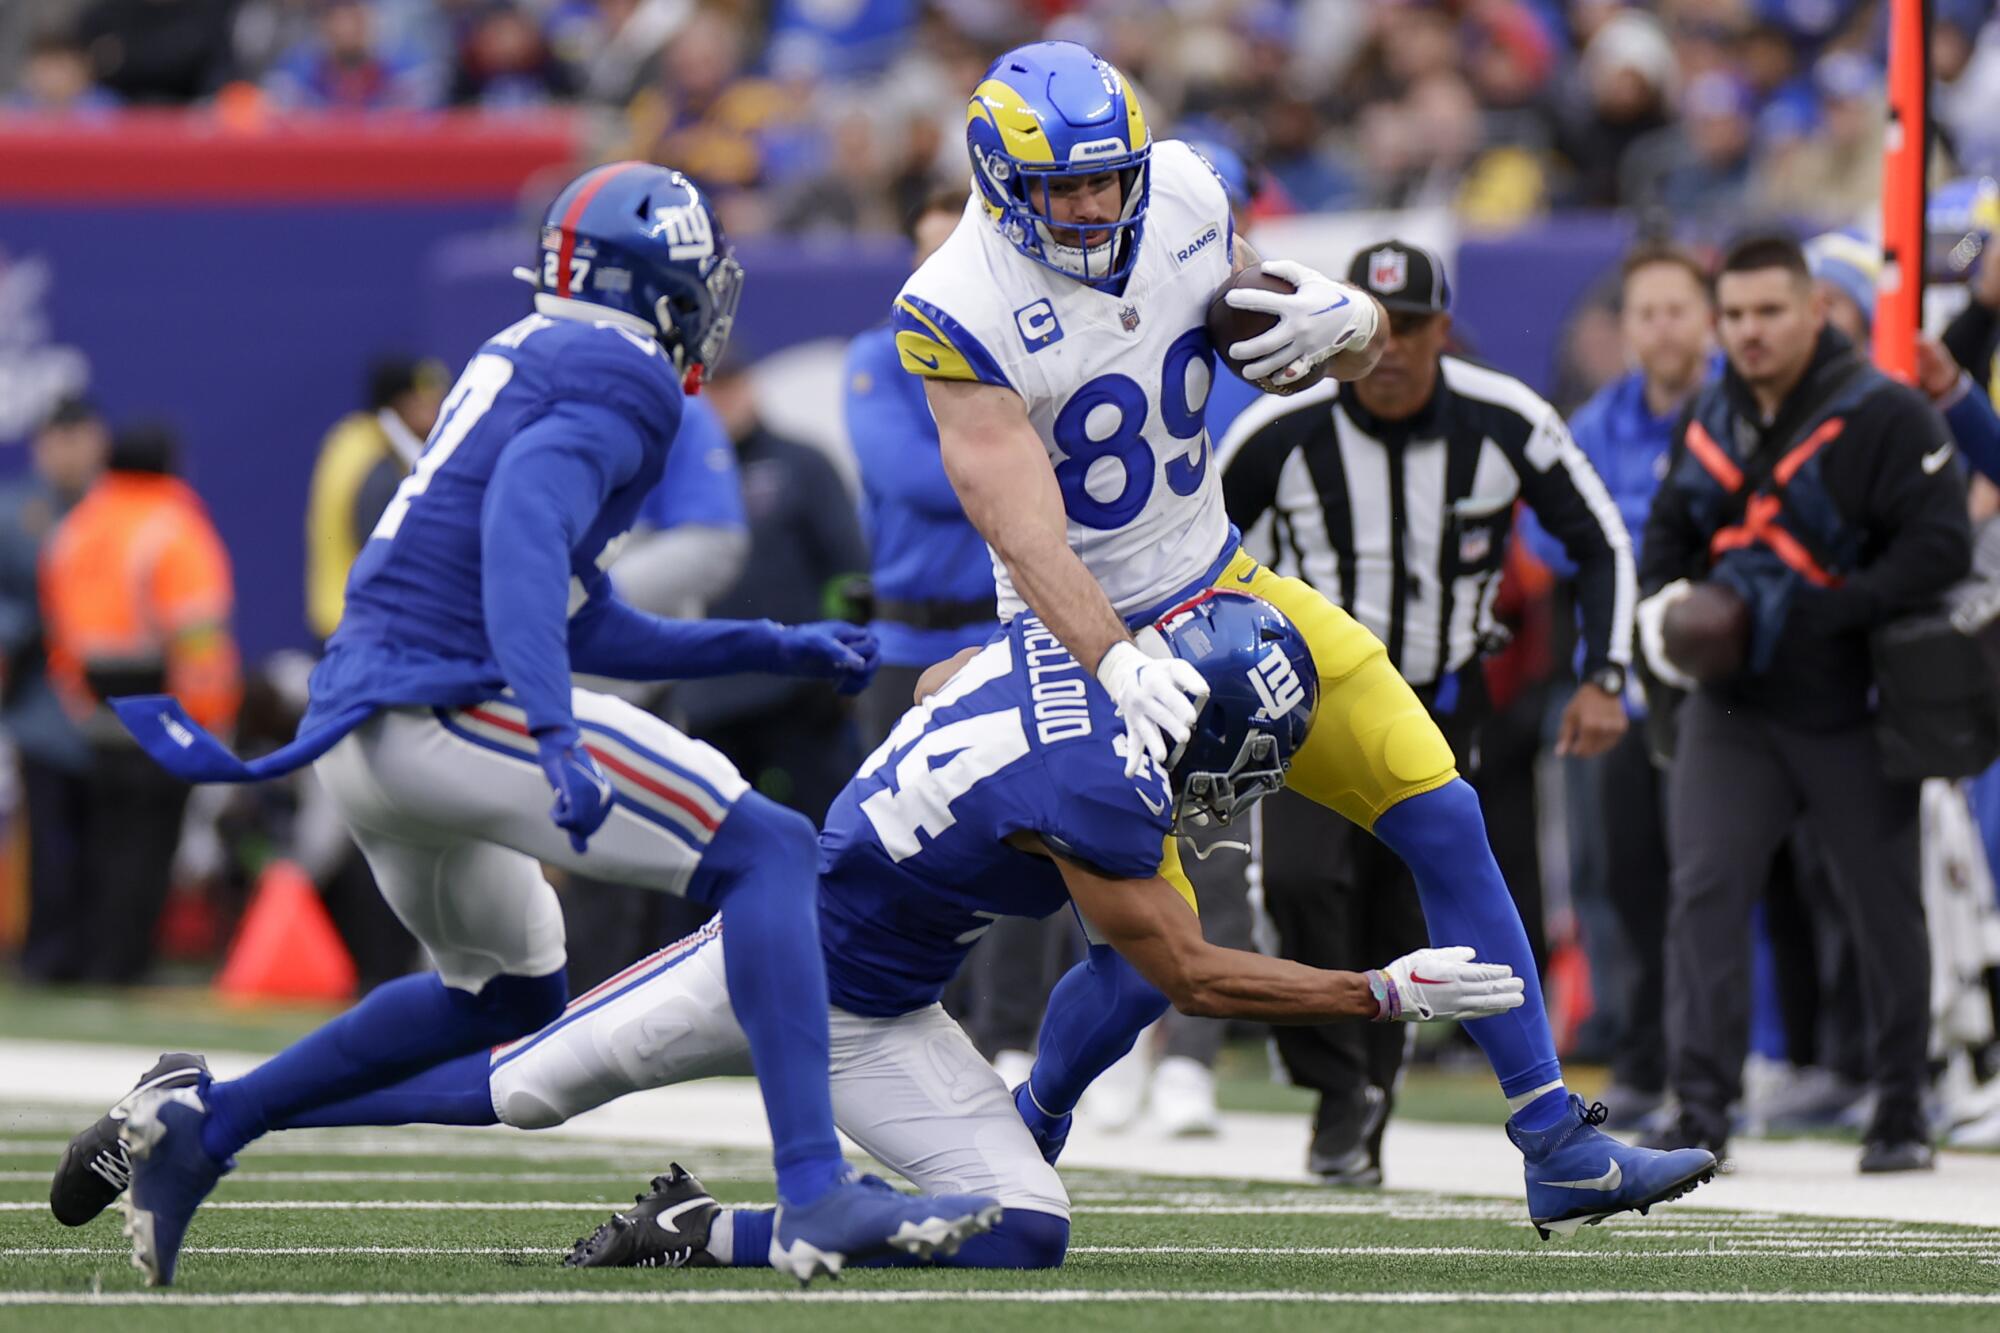 Rams tight end Tyler Higbee runs with the ball as New York Giants cornerback Nick McCloud tries to tackle him.